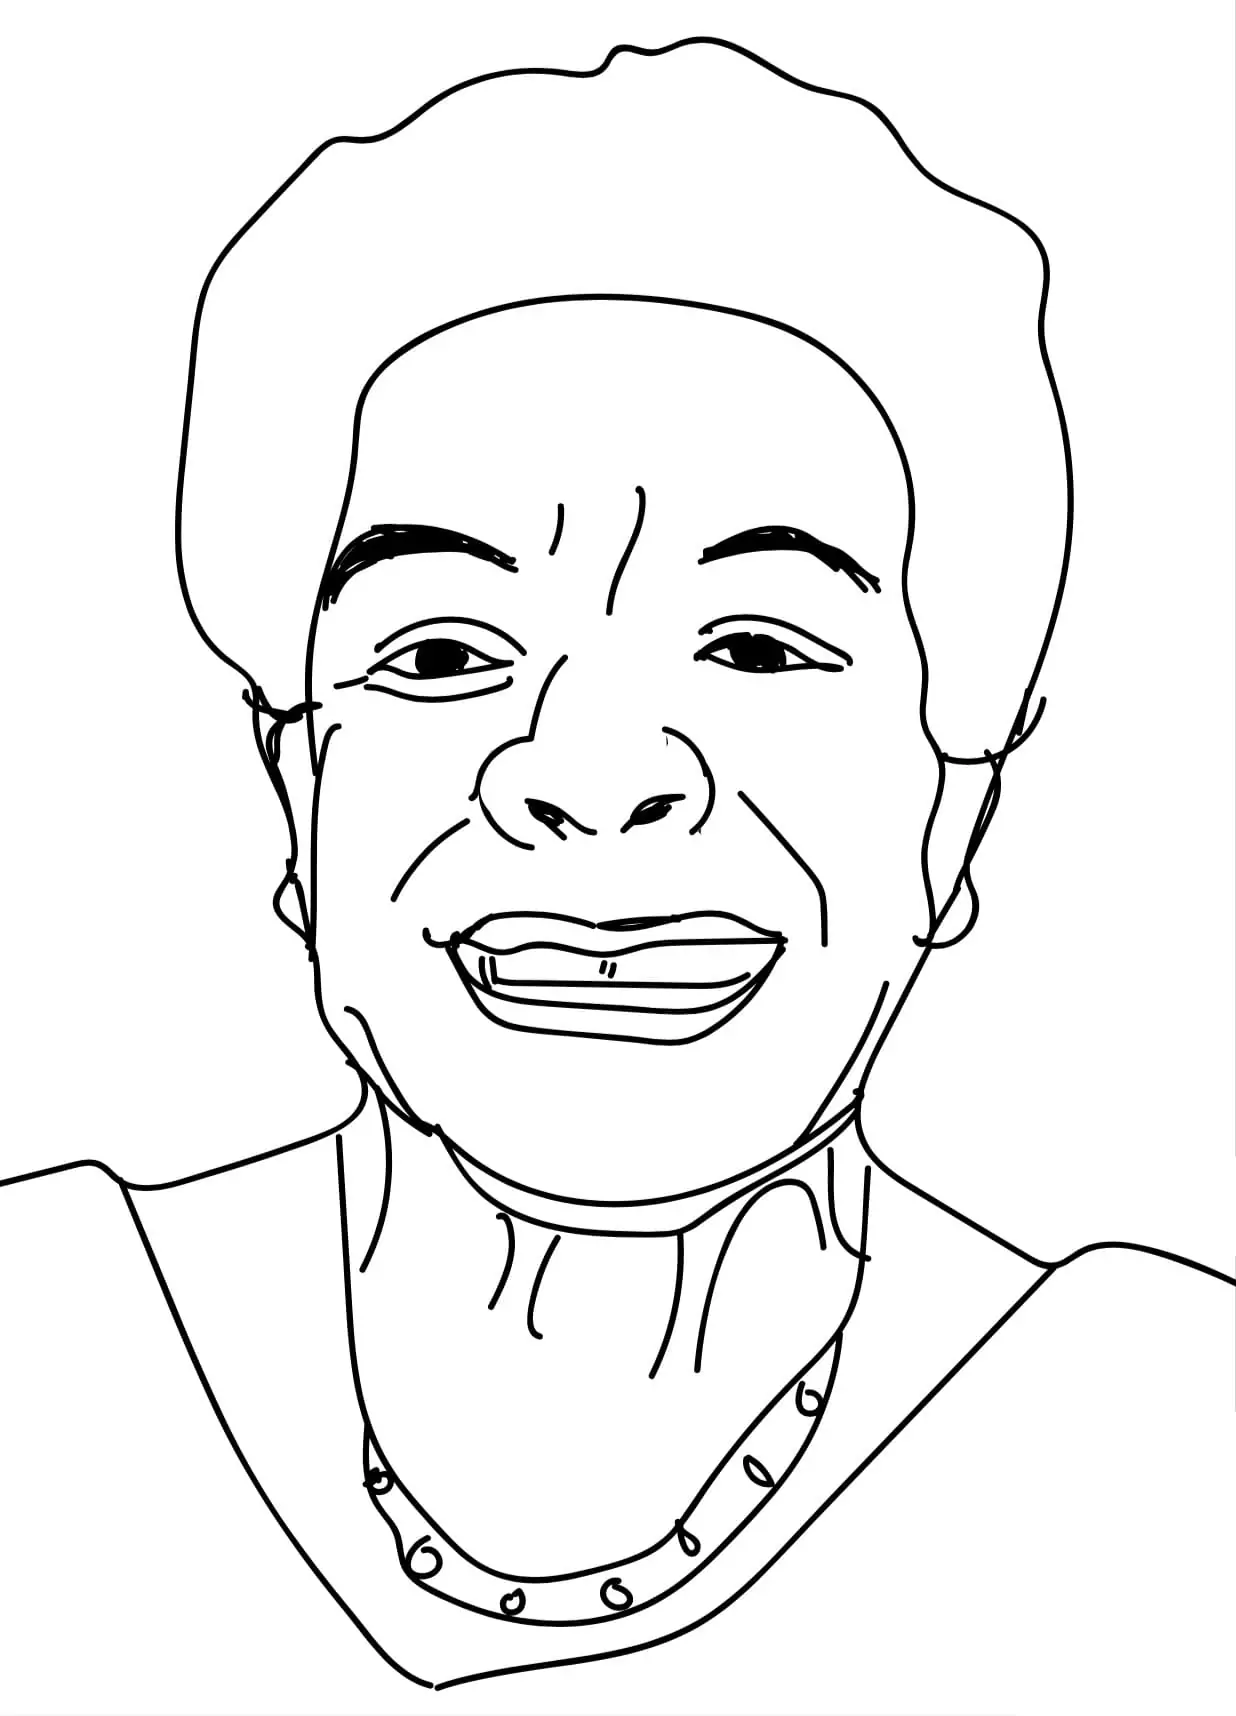 Maya Angelou 1 Coloring Page - Free Printable Coloring Pages for Kids